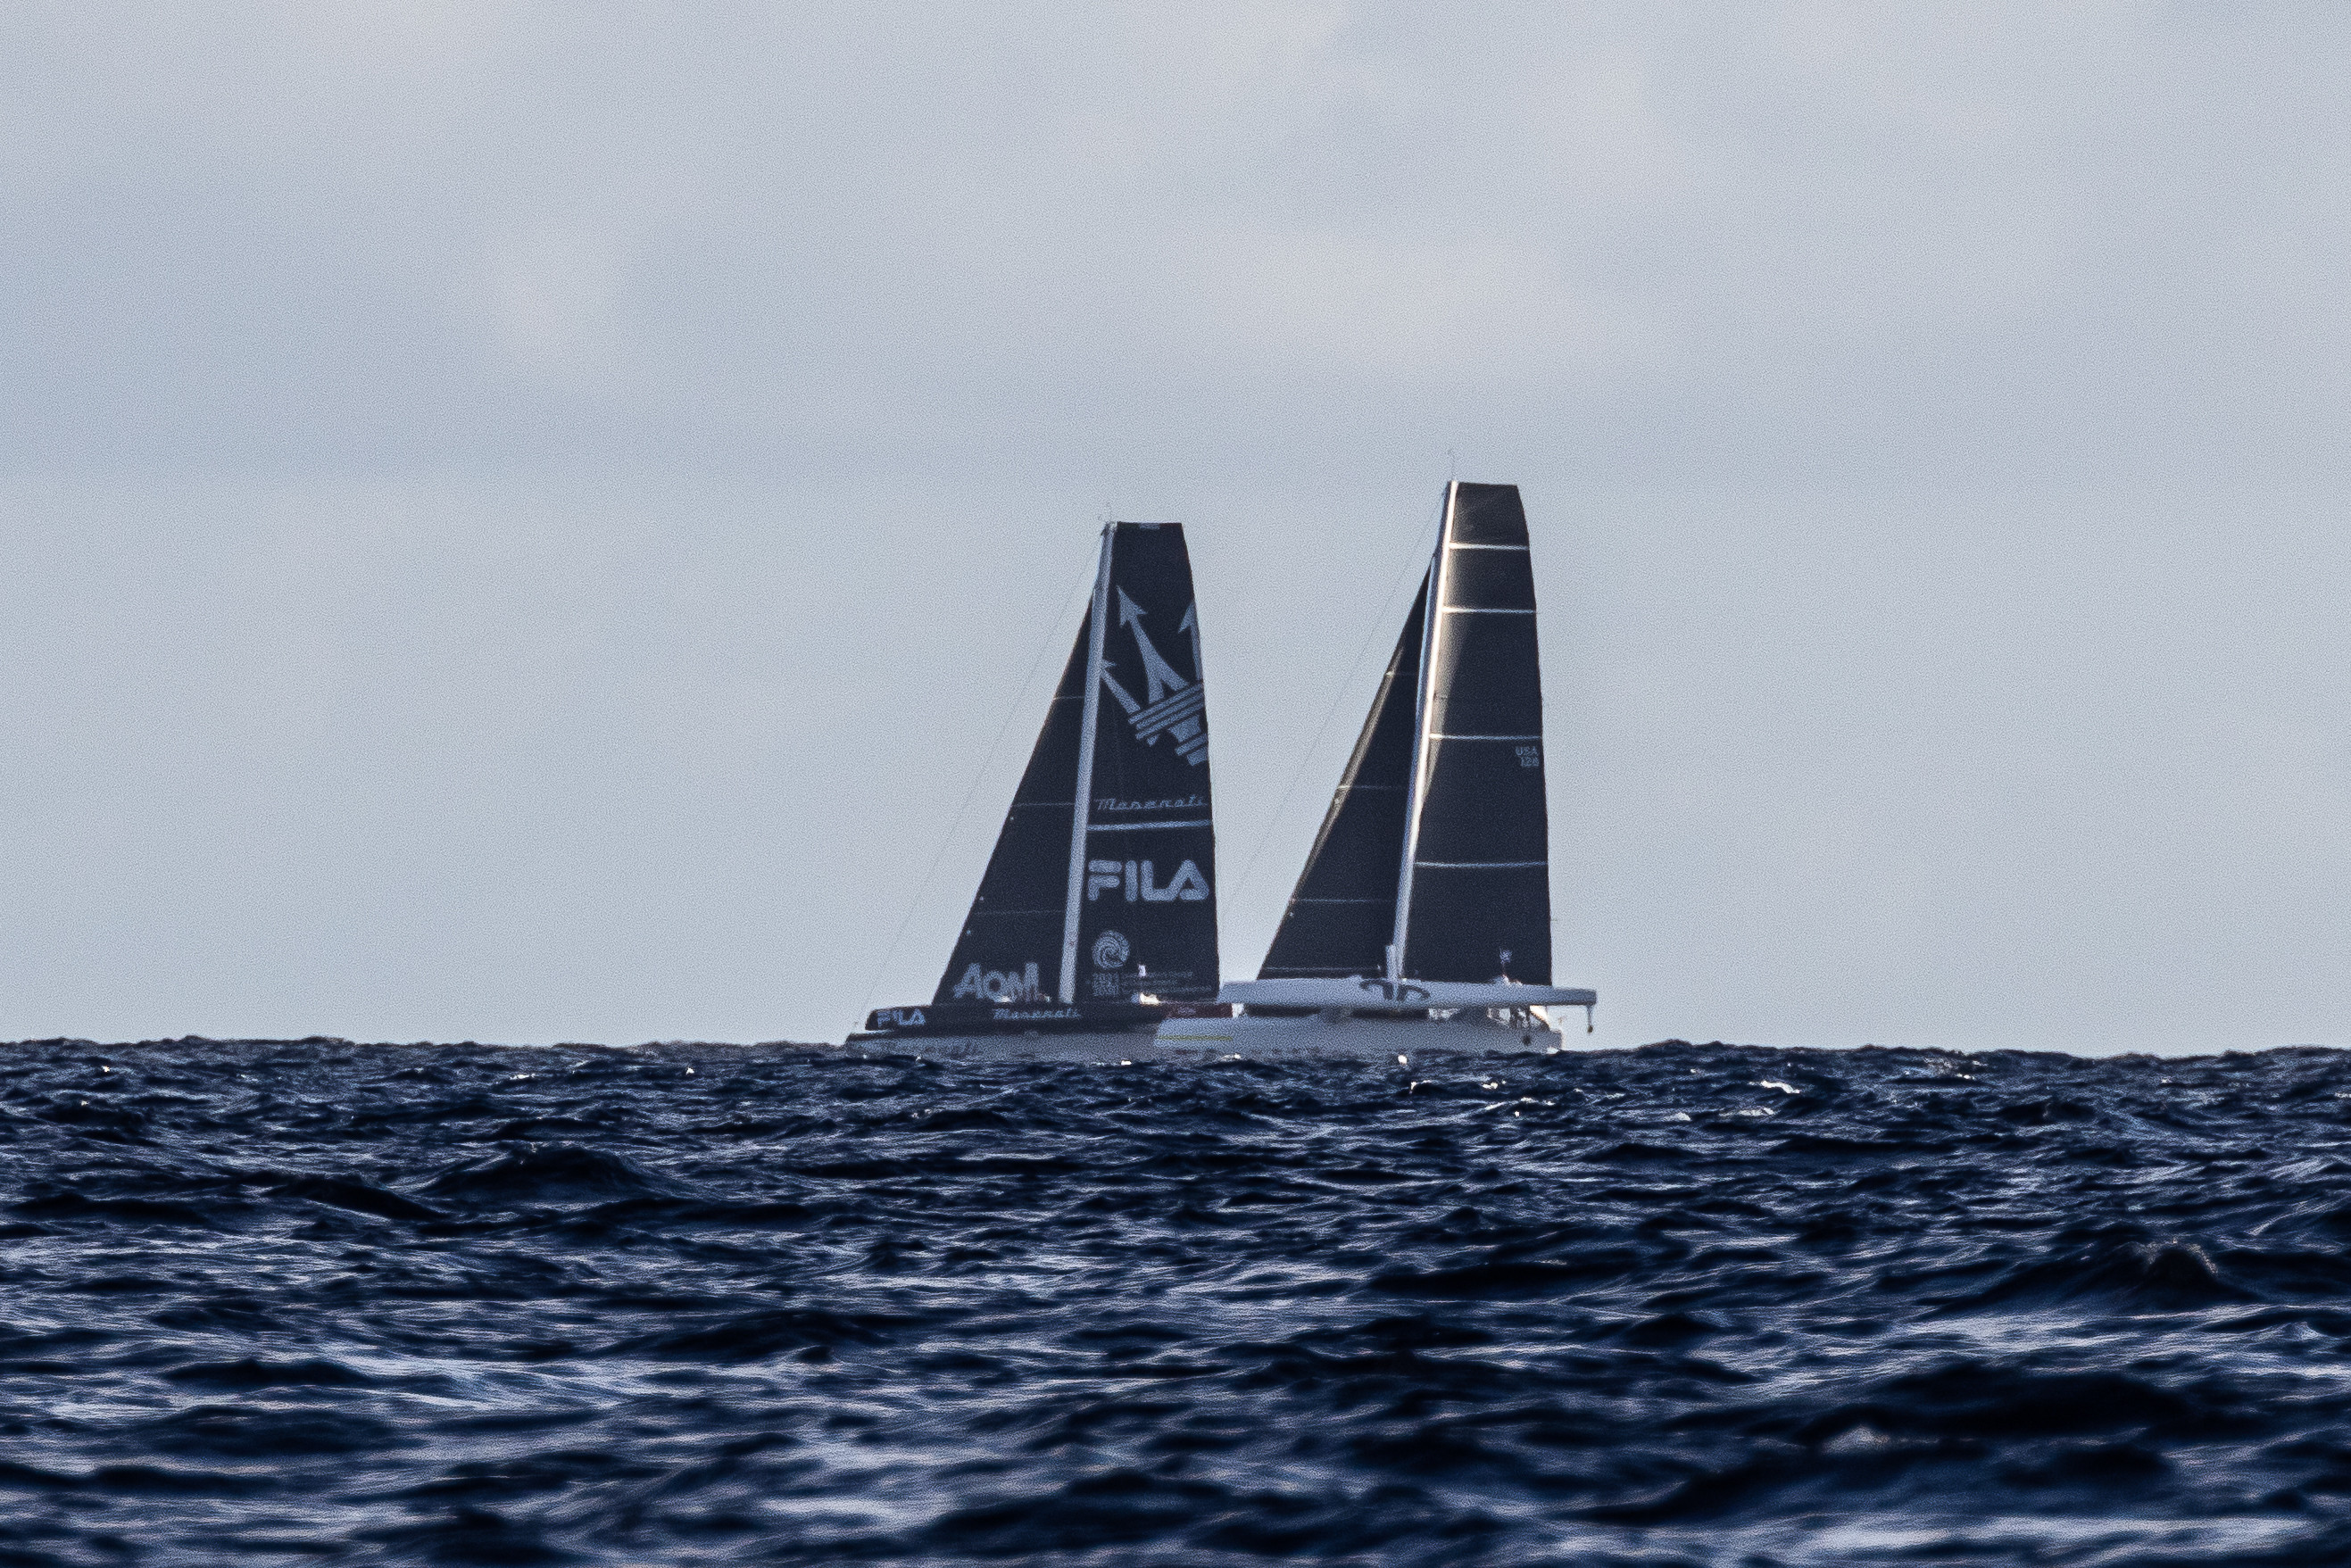 Jason Carroll’s MOD 70 Argo (USA) crossed the finish line of the RORC Caribbean 600 to take Multihull Line Honours and set a new Multihull Race Record of  29 hours, 38 mins, 44 secs. © Arthur Daniel/RORC